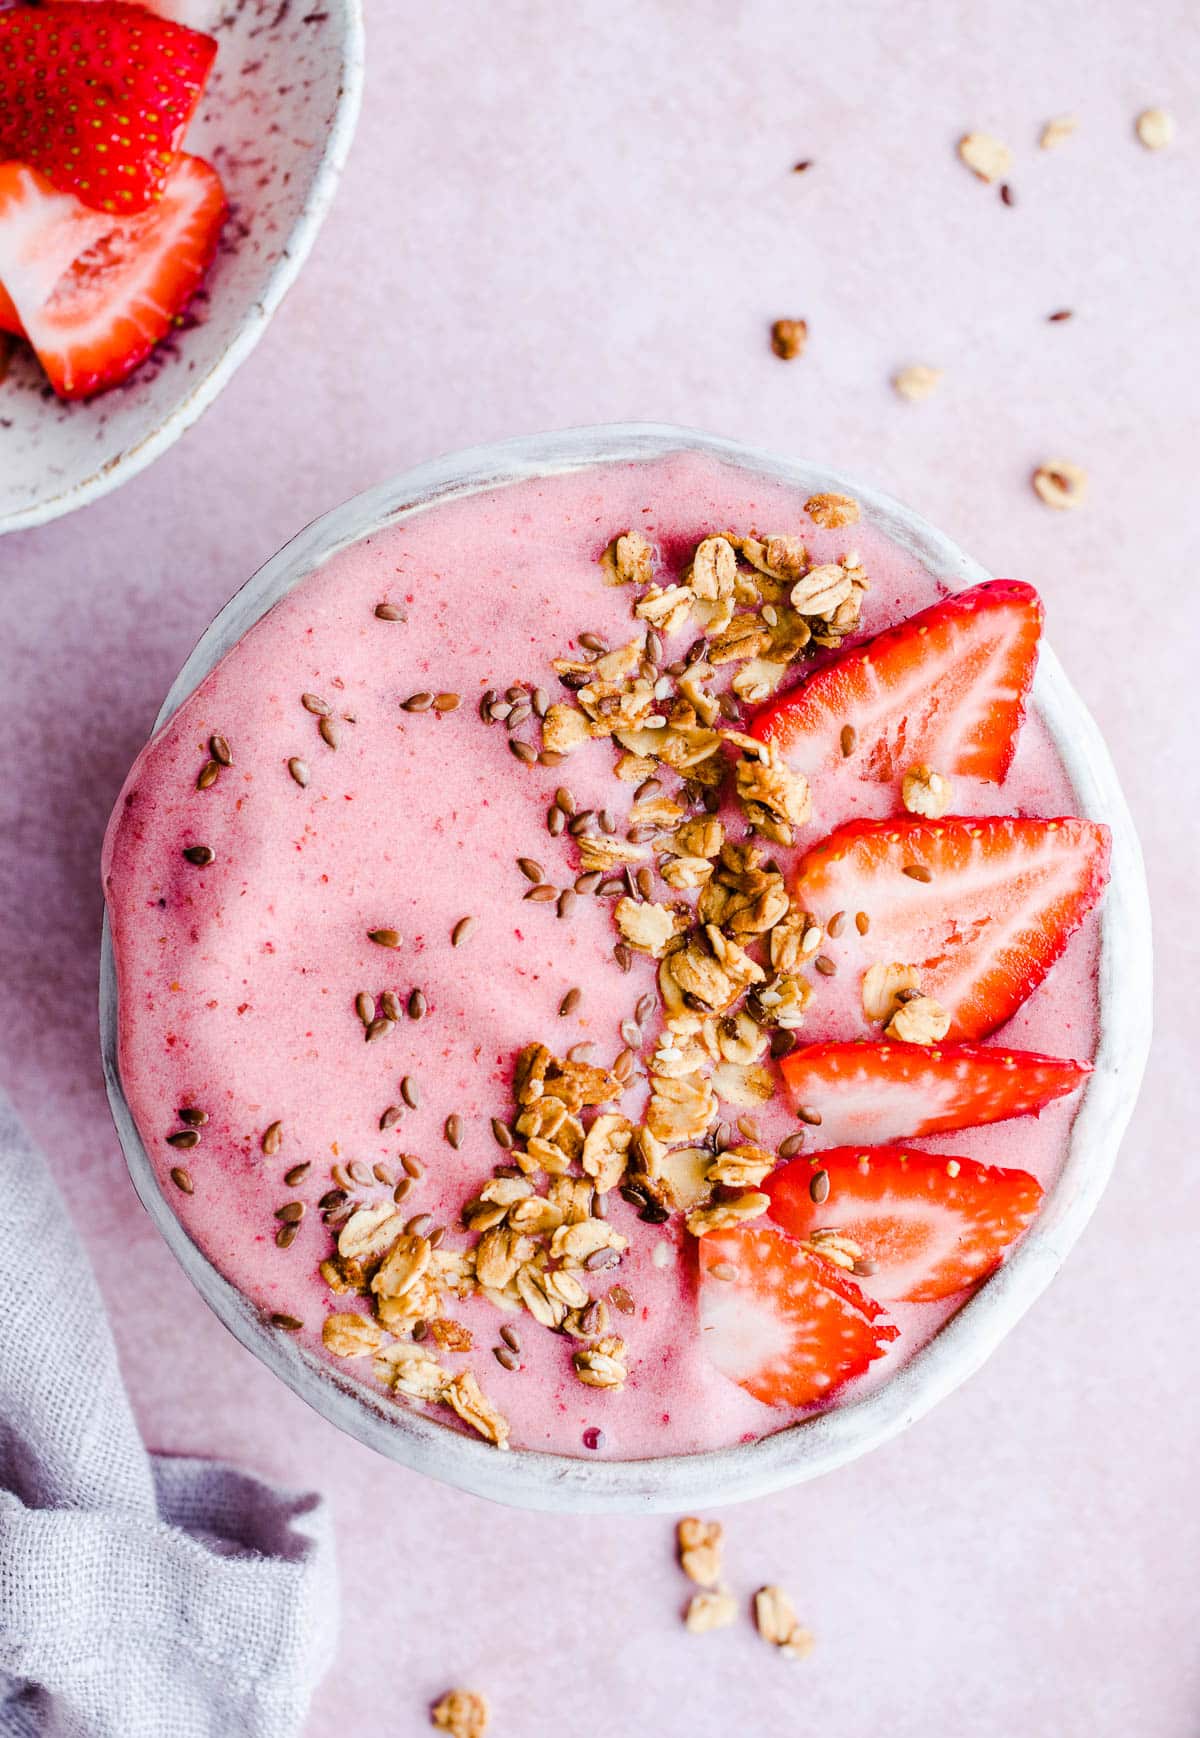 A smoothie bowl topped with granola and strawberries.